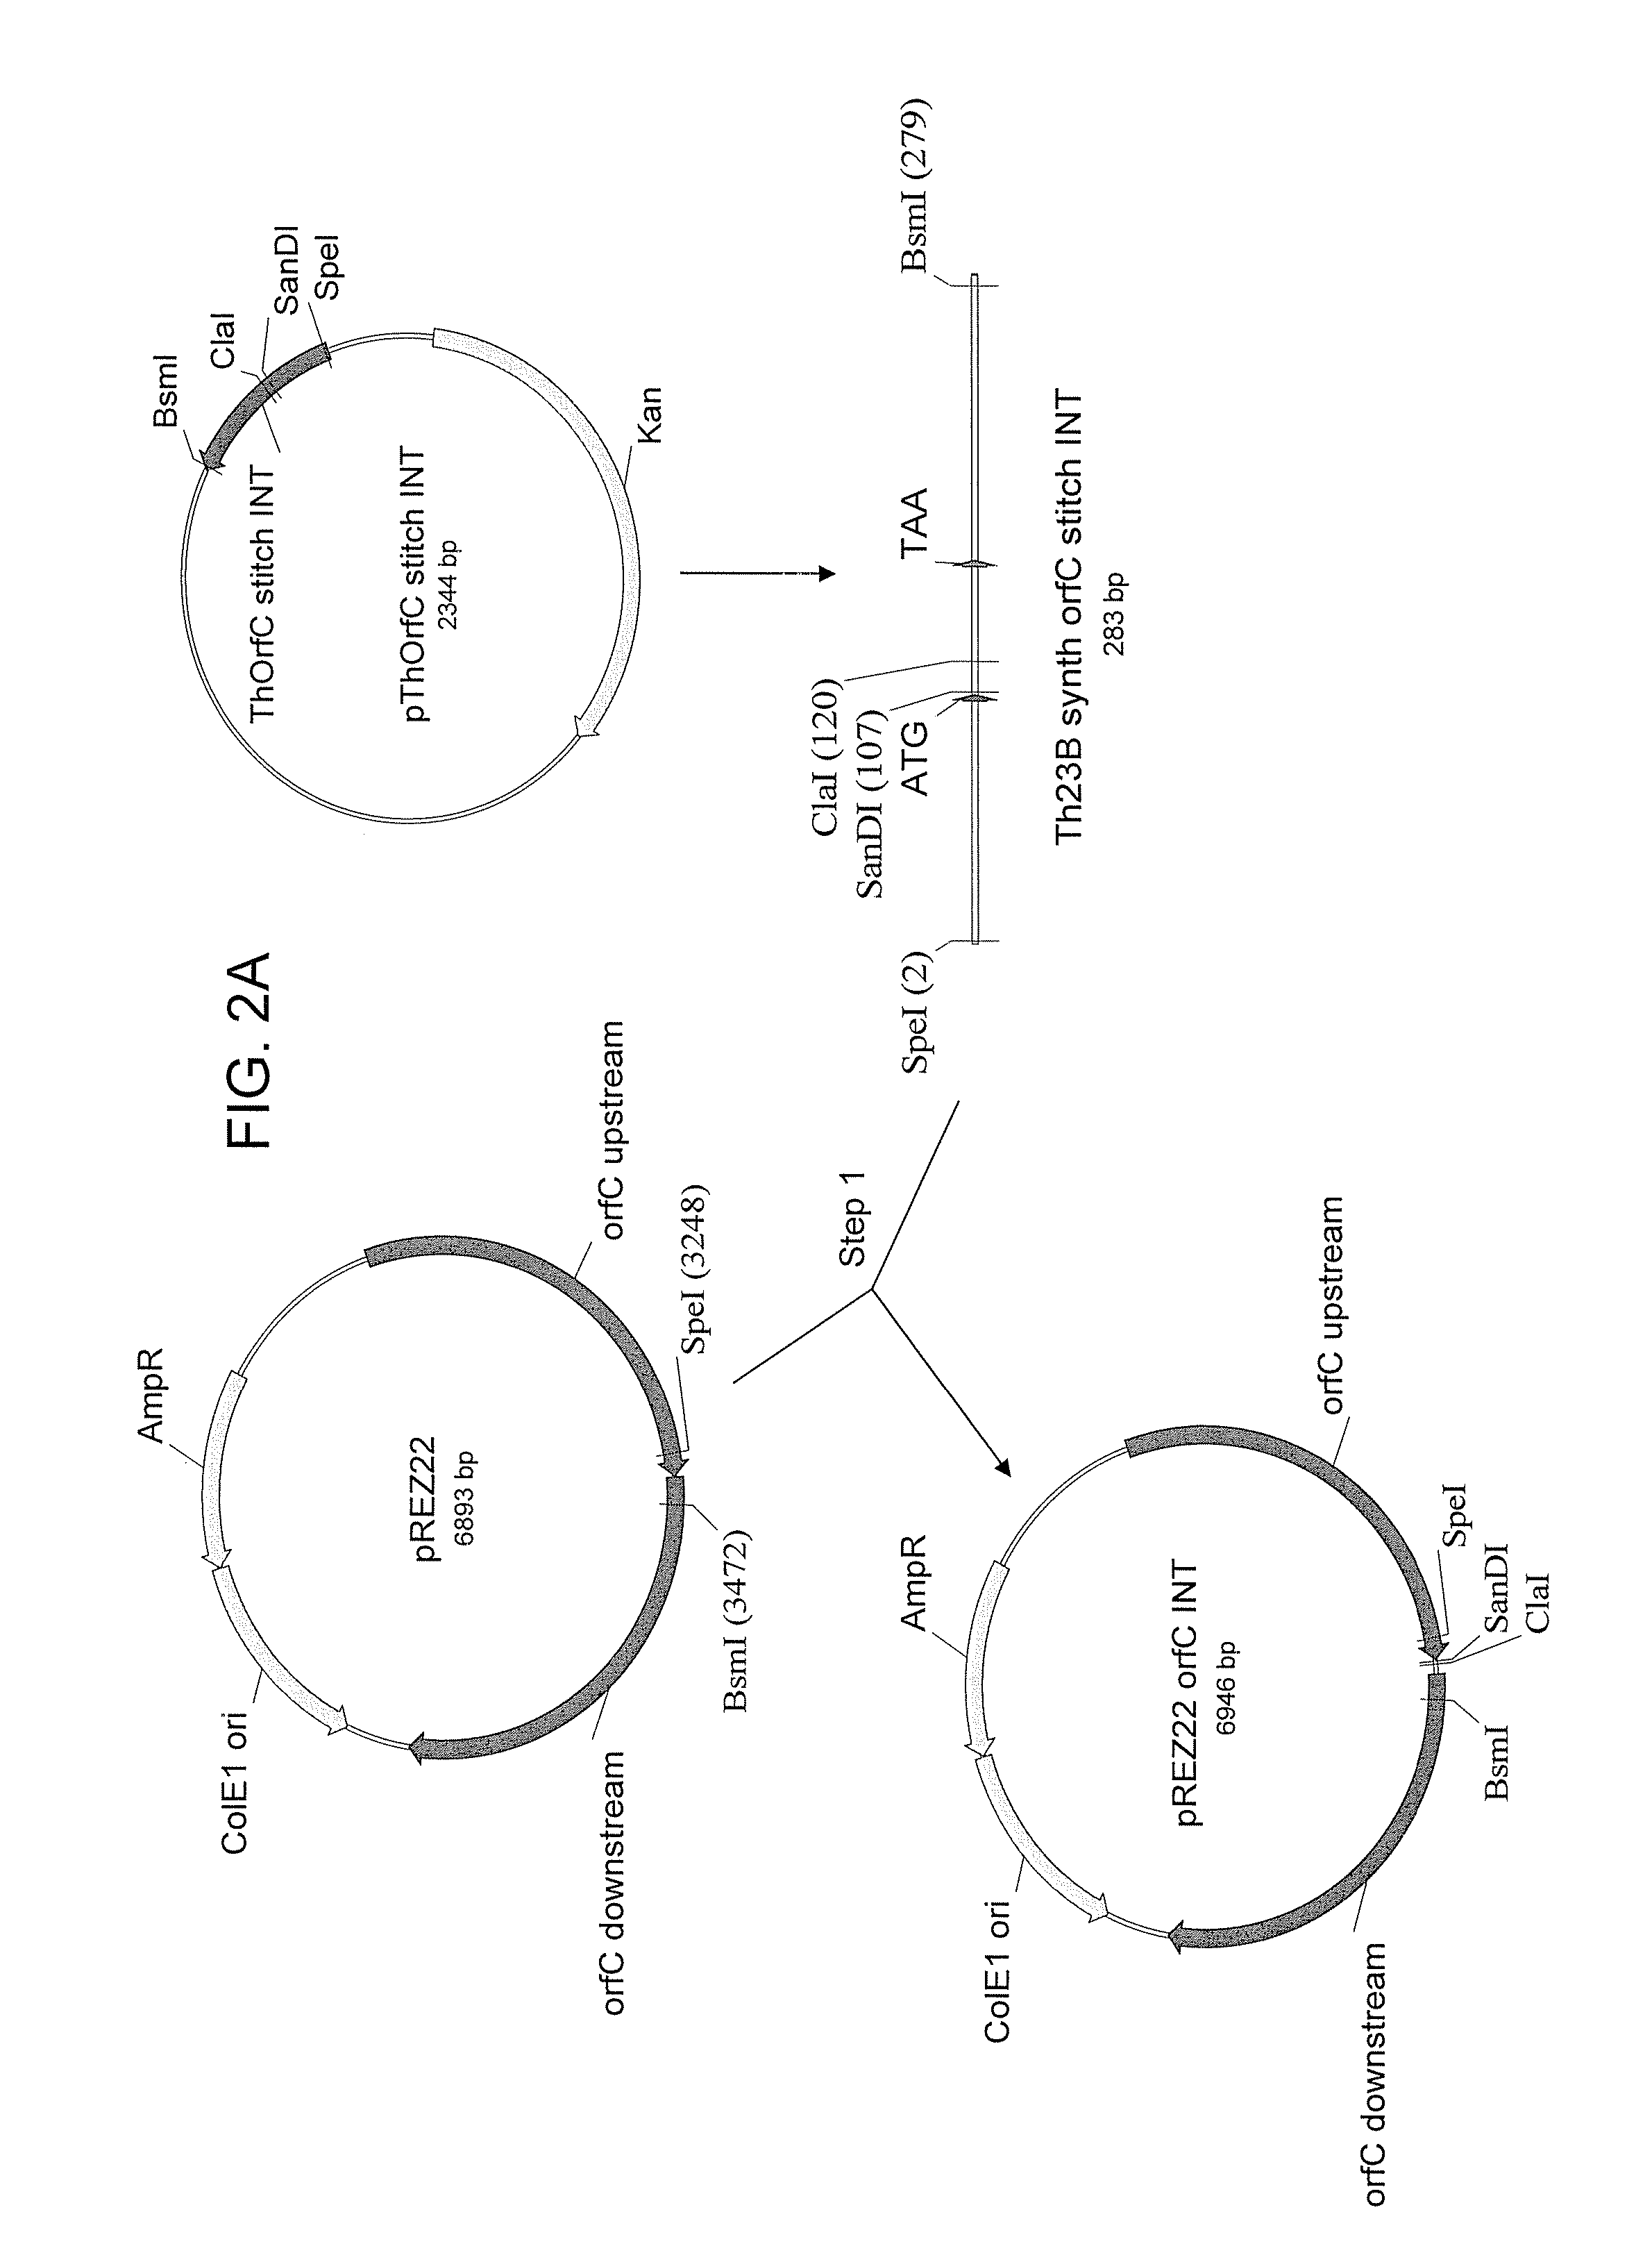 Chimeric pufa polyketide synthase systems and uses thereof